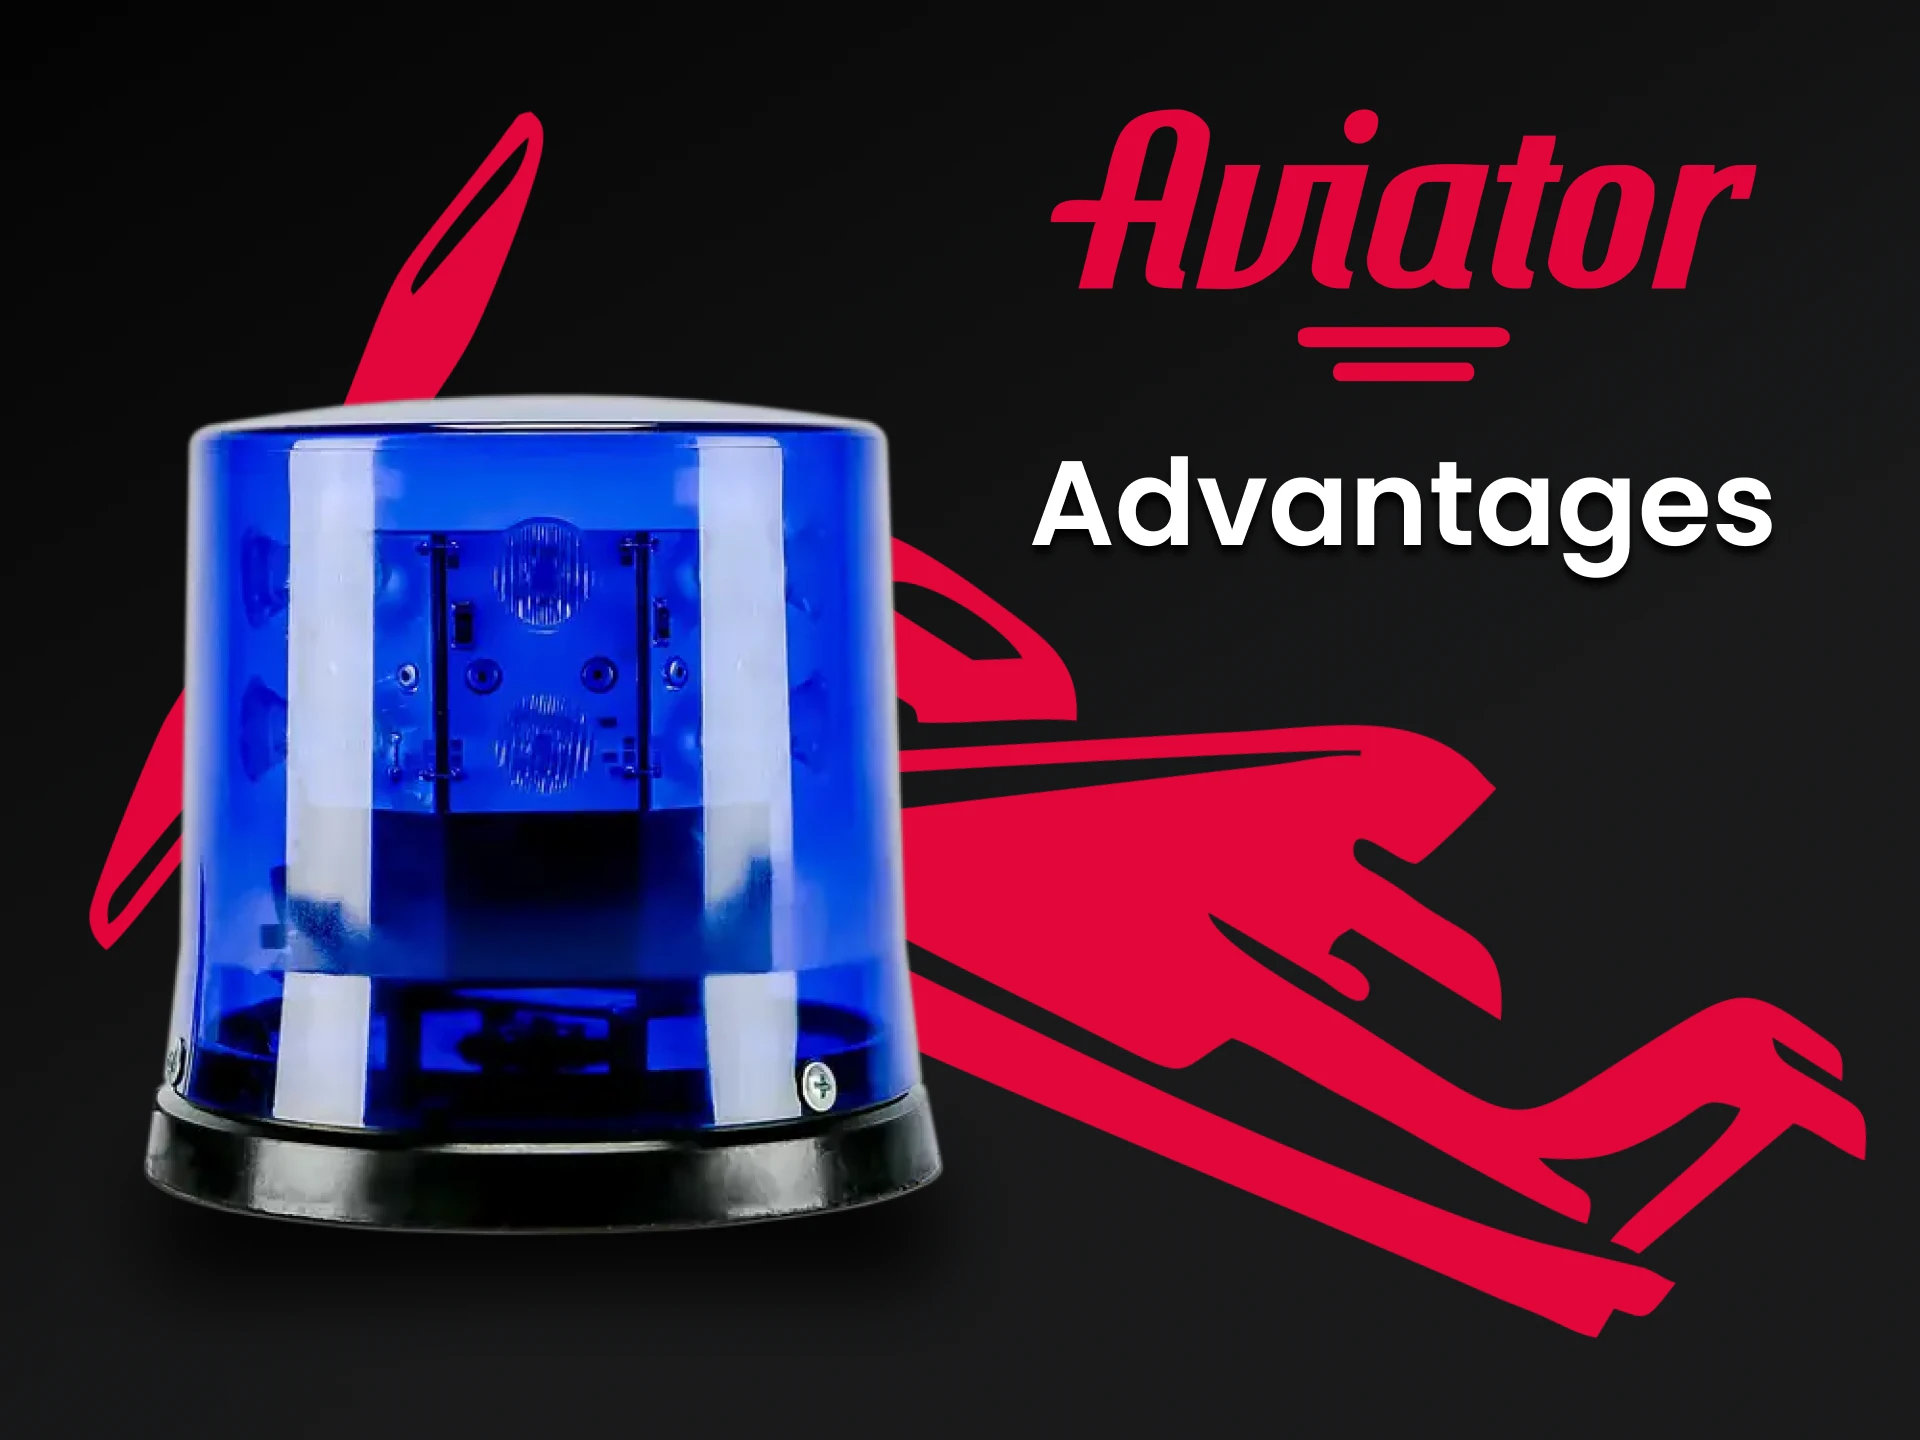 Find out how signals for Aviator can help you.